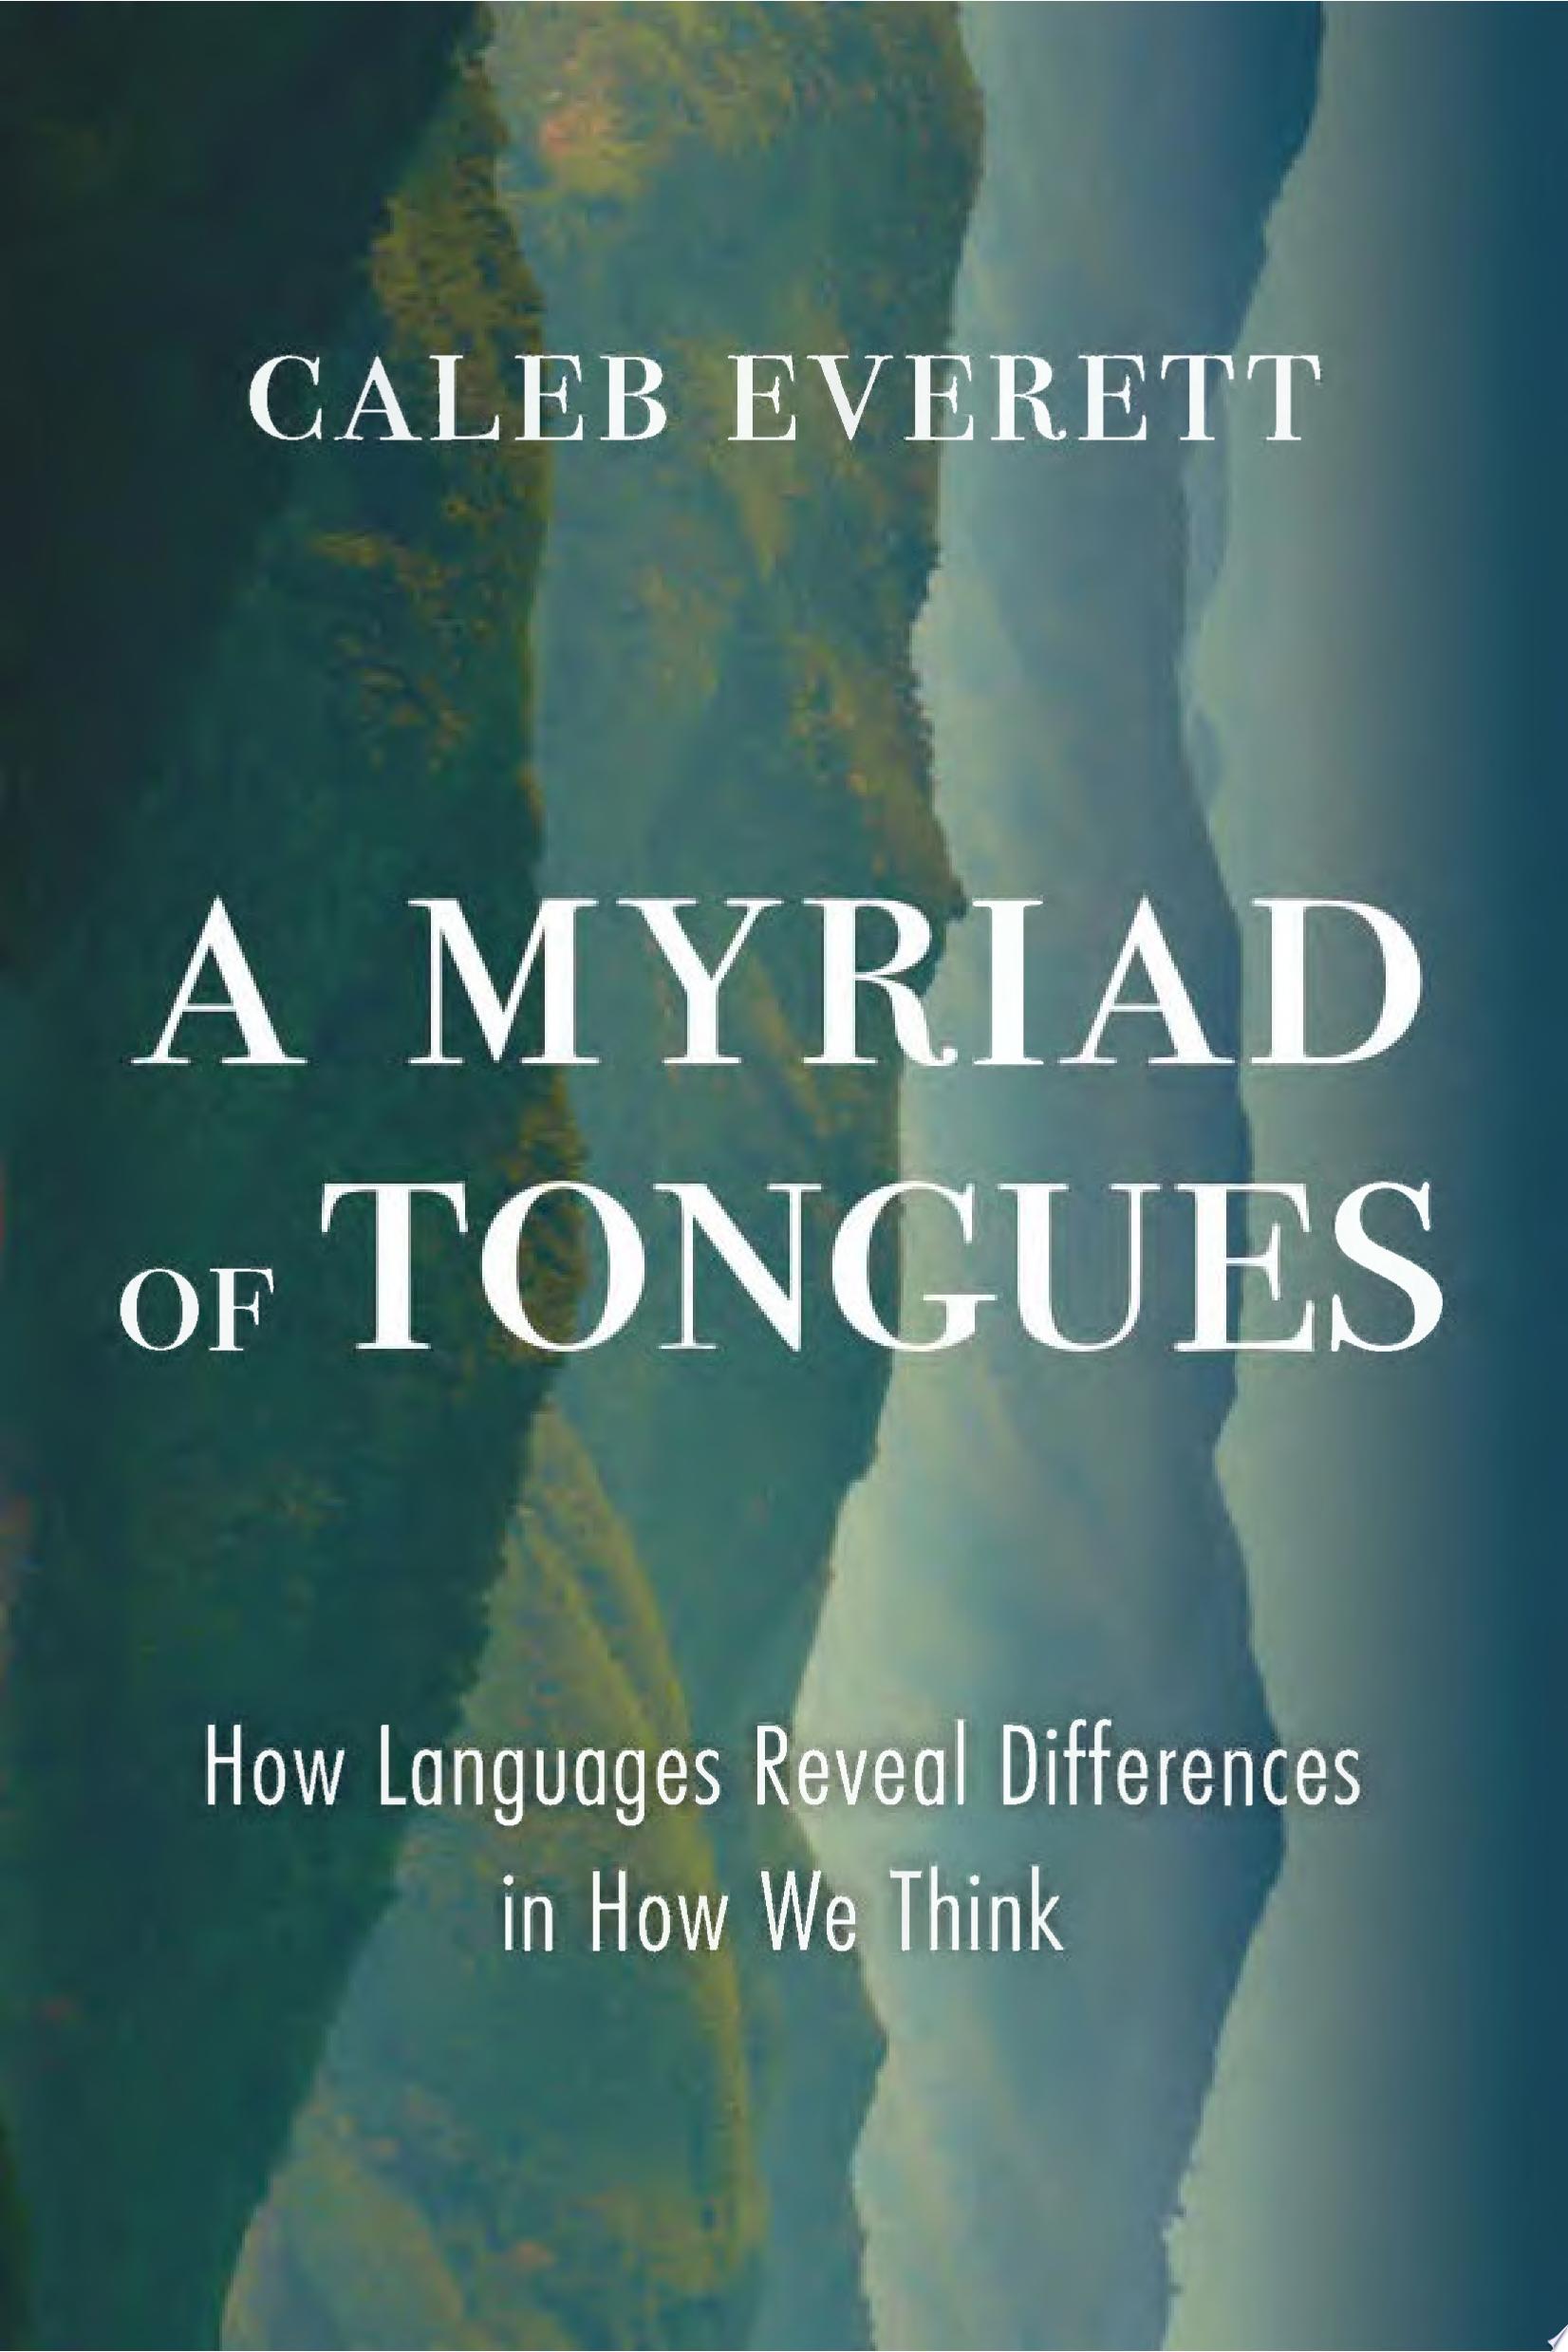 Image for "A Myriad of Tongues"